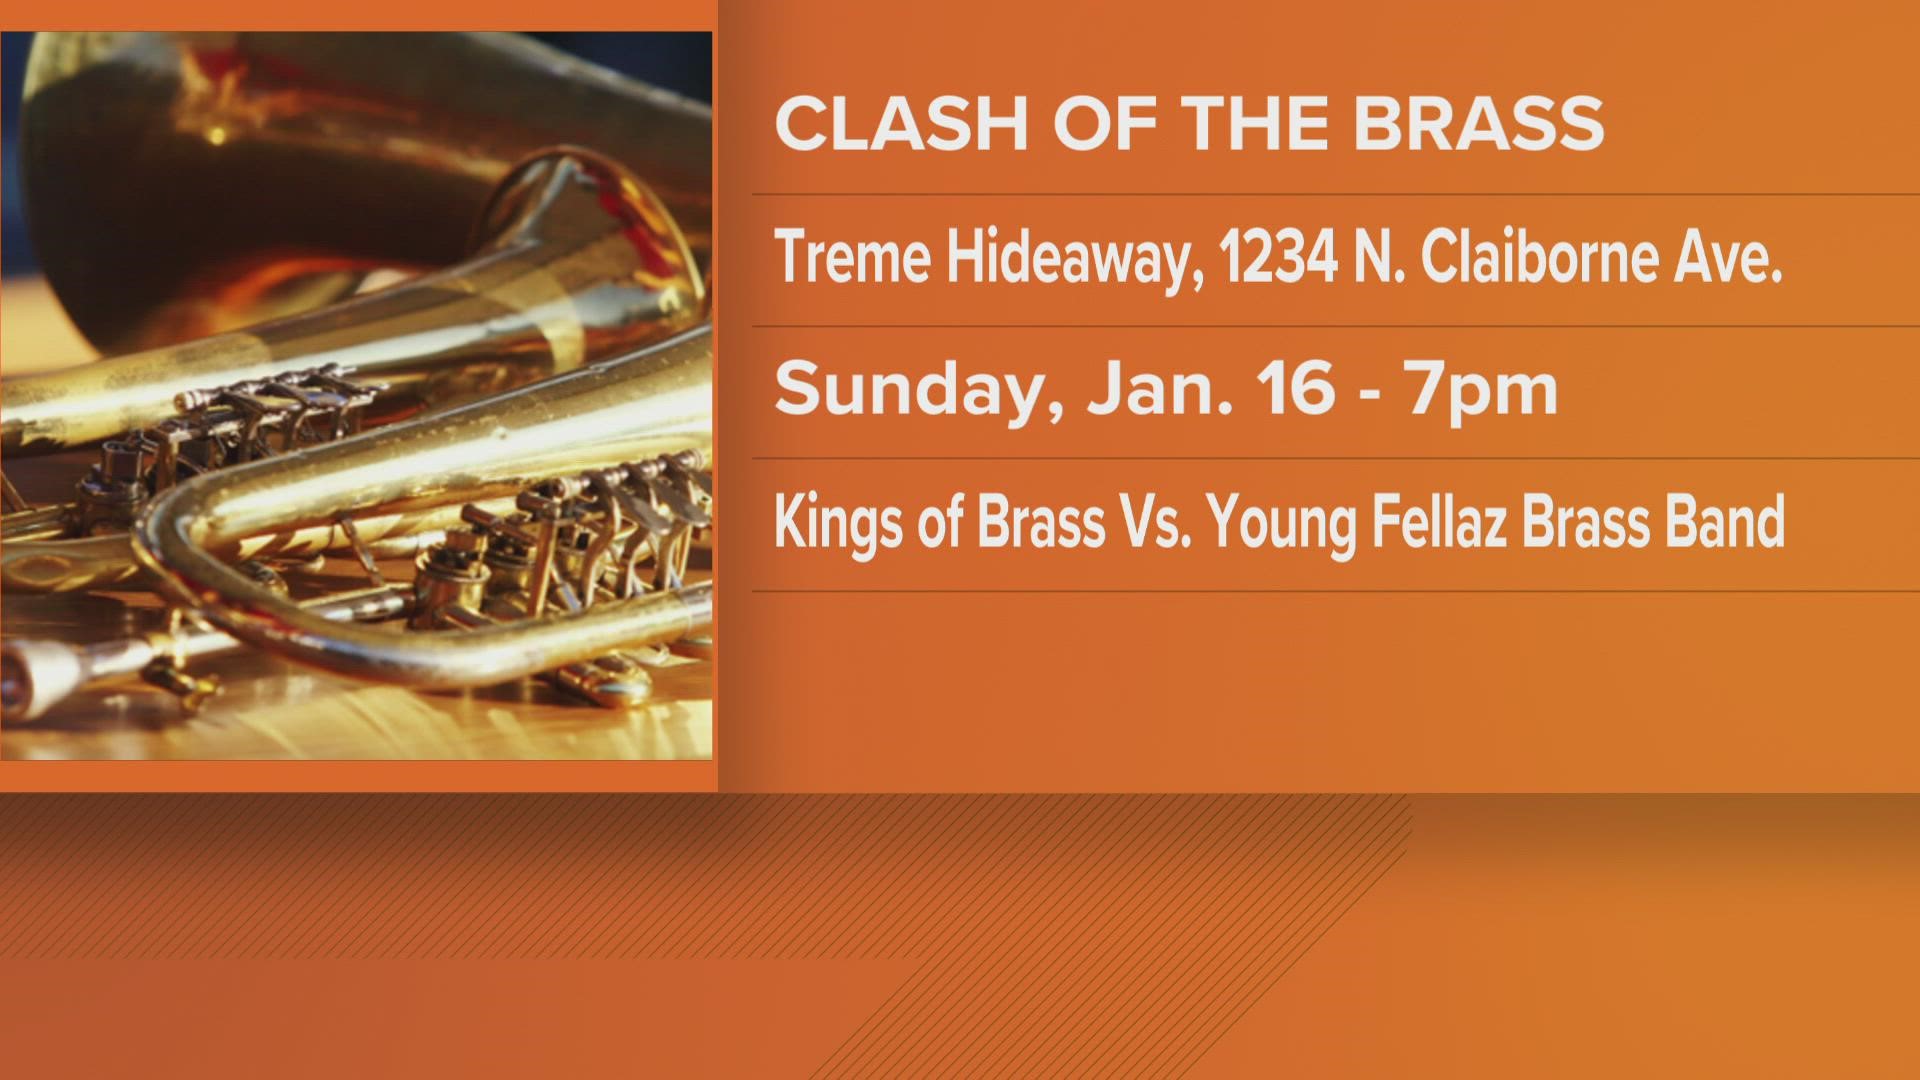 Kings of the Brass will take on the Young Fellaz Brass Band